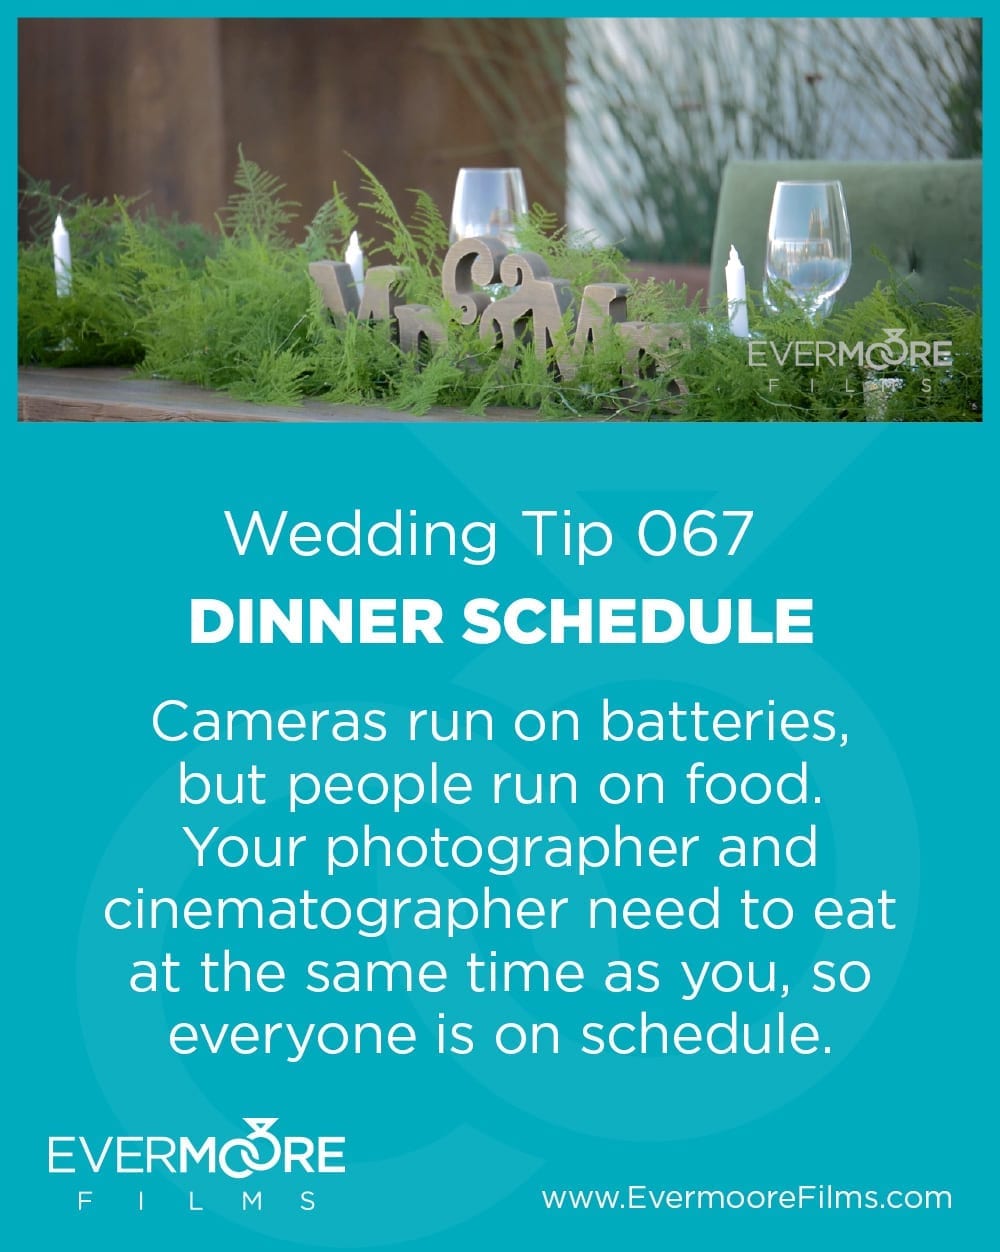 Dinner Schedule | Wedding Tip 007 | Evermoore Films | Cameras run on batteries, but people run on food. Your photographer and cinematographer need to eat at the same time as you, so everyone is on schedule.